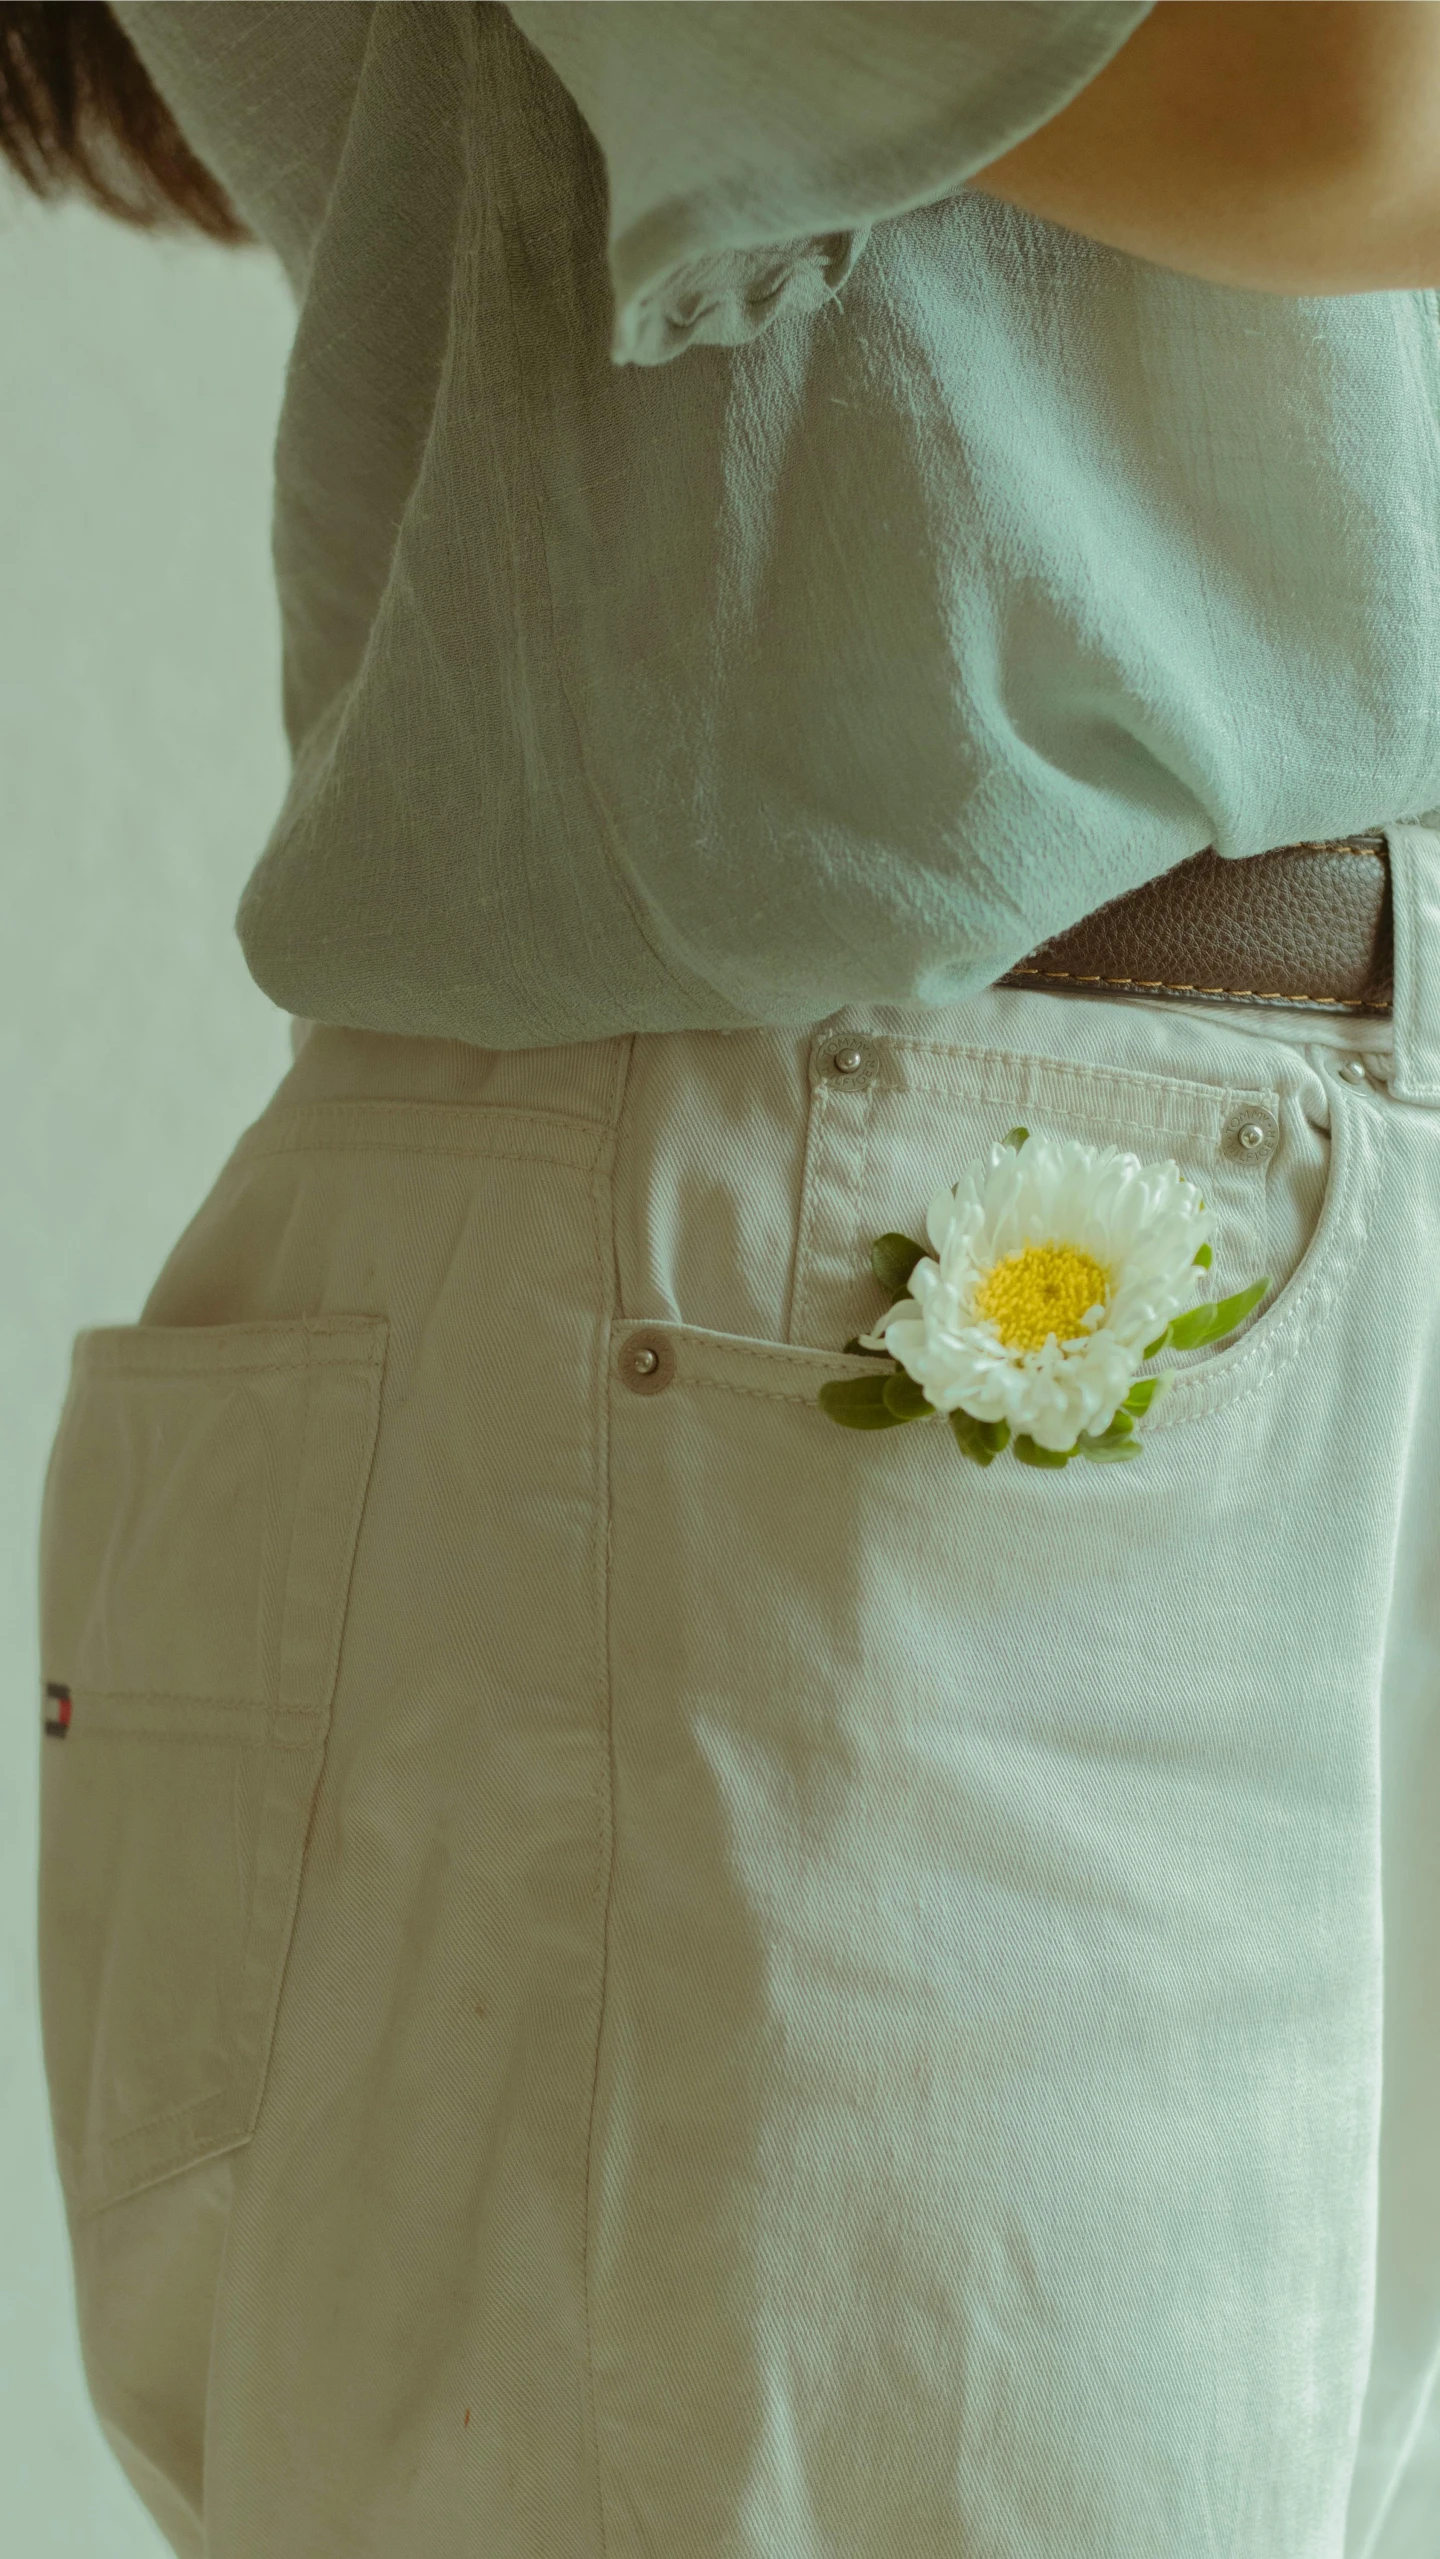 a persons belly with a flower in his pocket